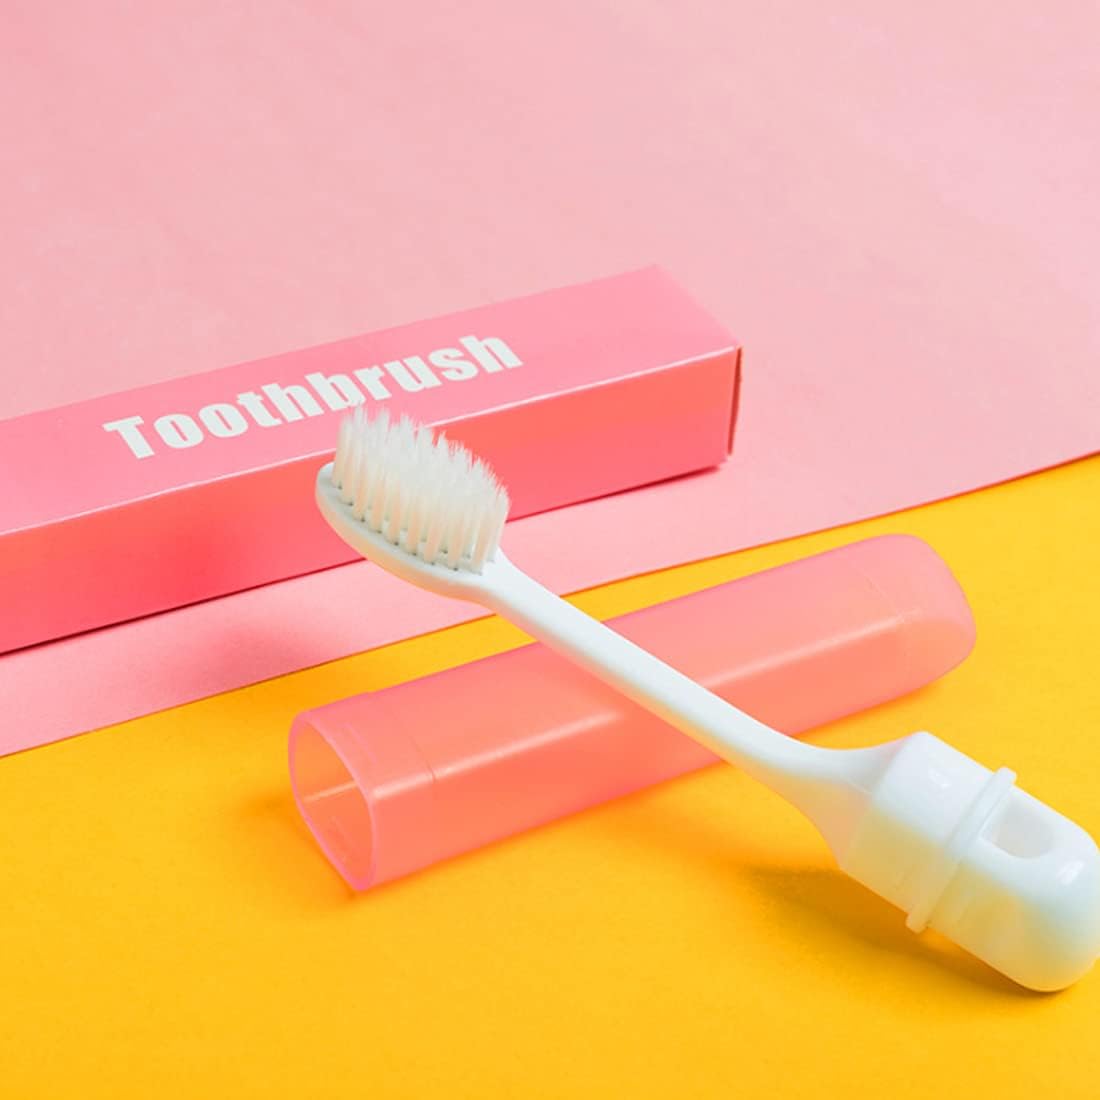 Showcasing a Pink Color Foldable Toothbrush and its cover/handle separately along with its box